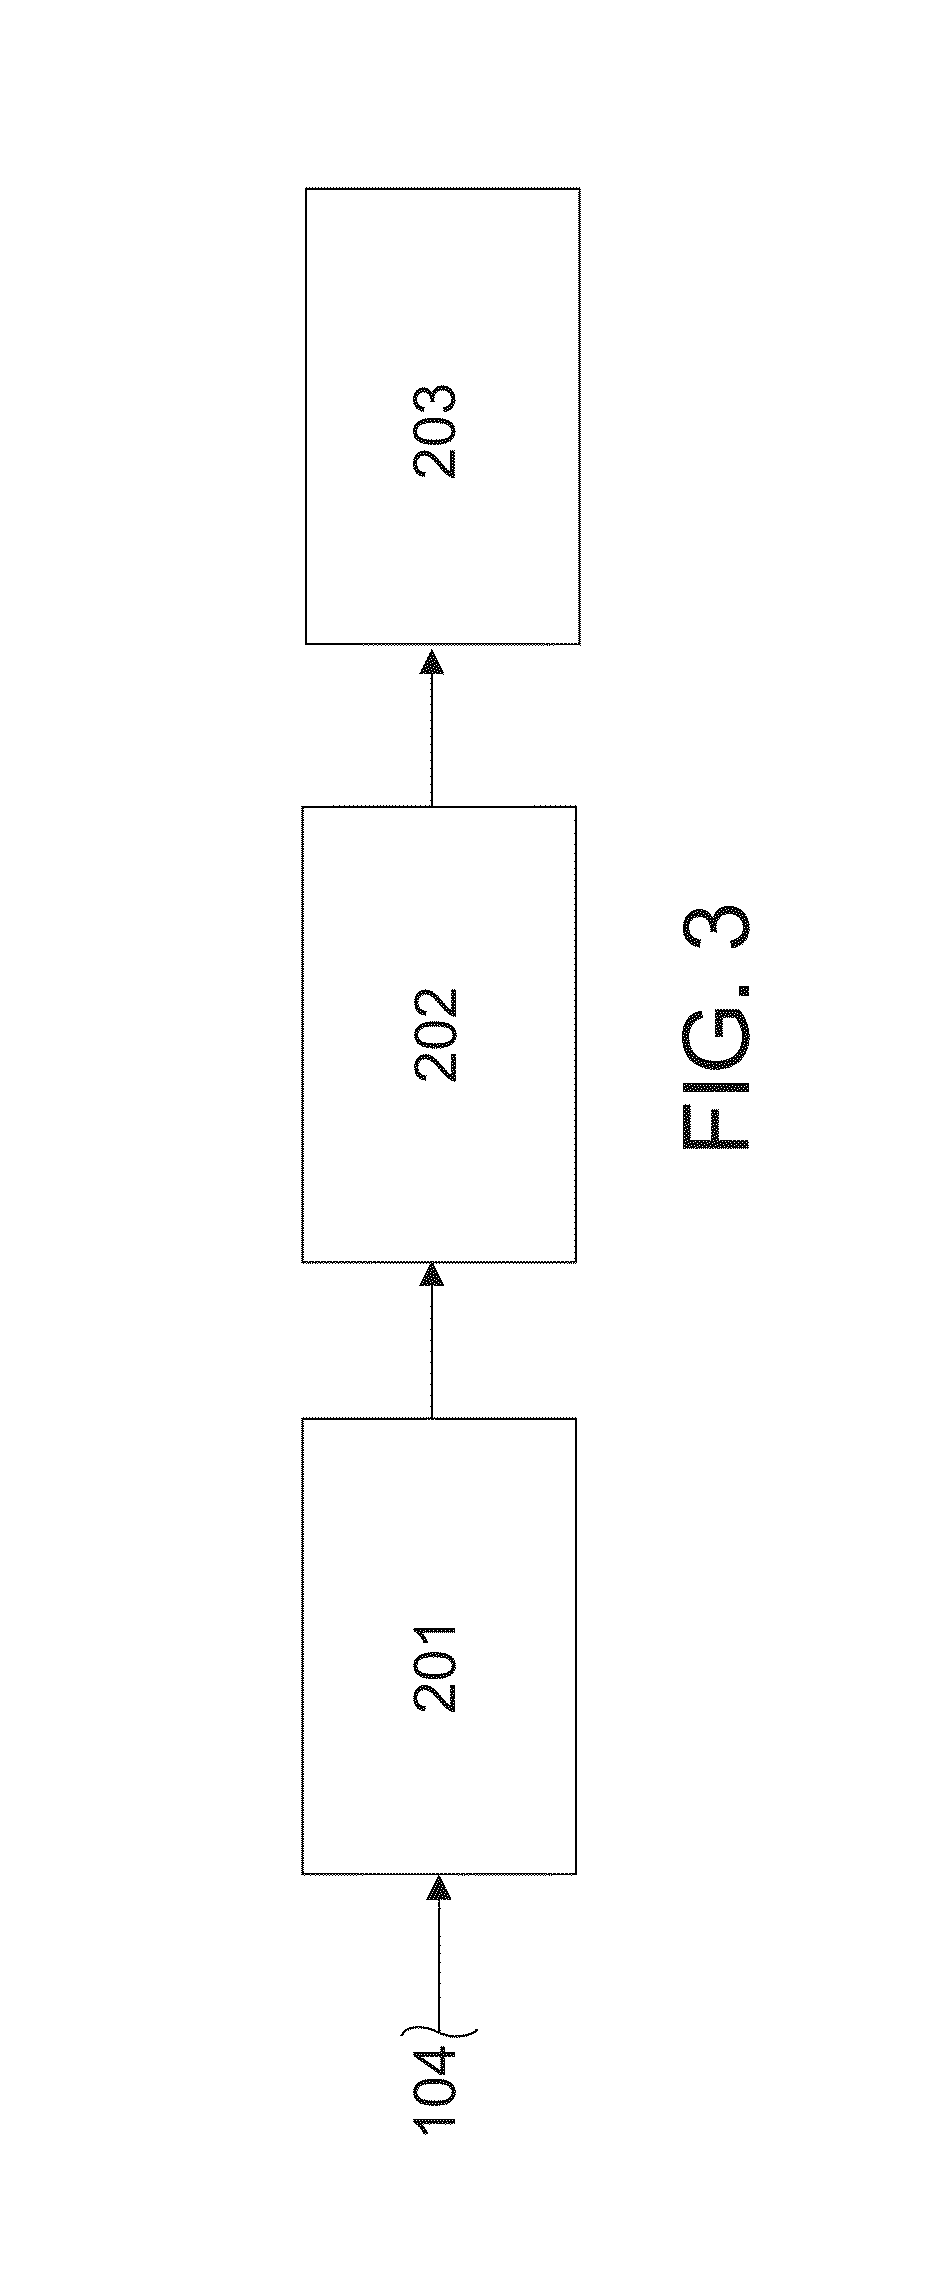 Method for bioleaching and solvent extraction with selective recovery of copper and zinc from polymetal concentrates of sulfides